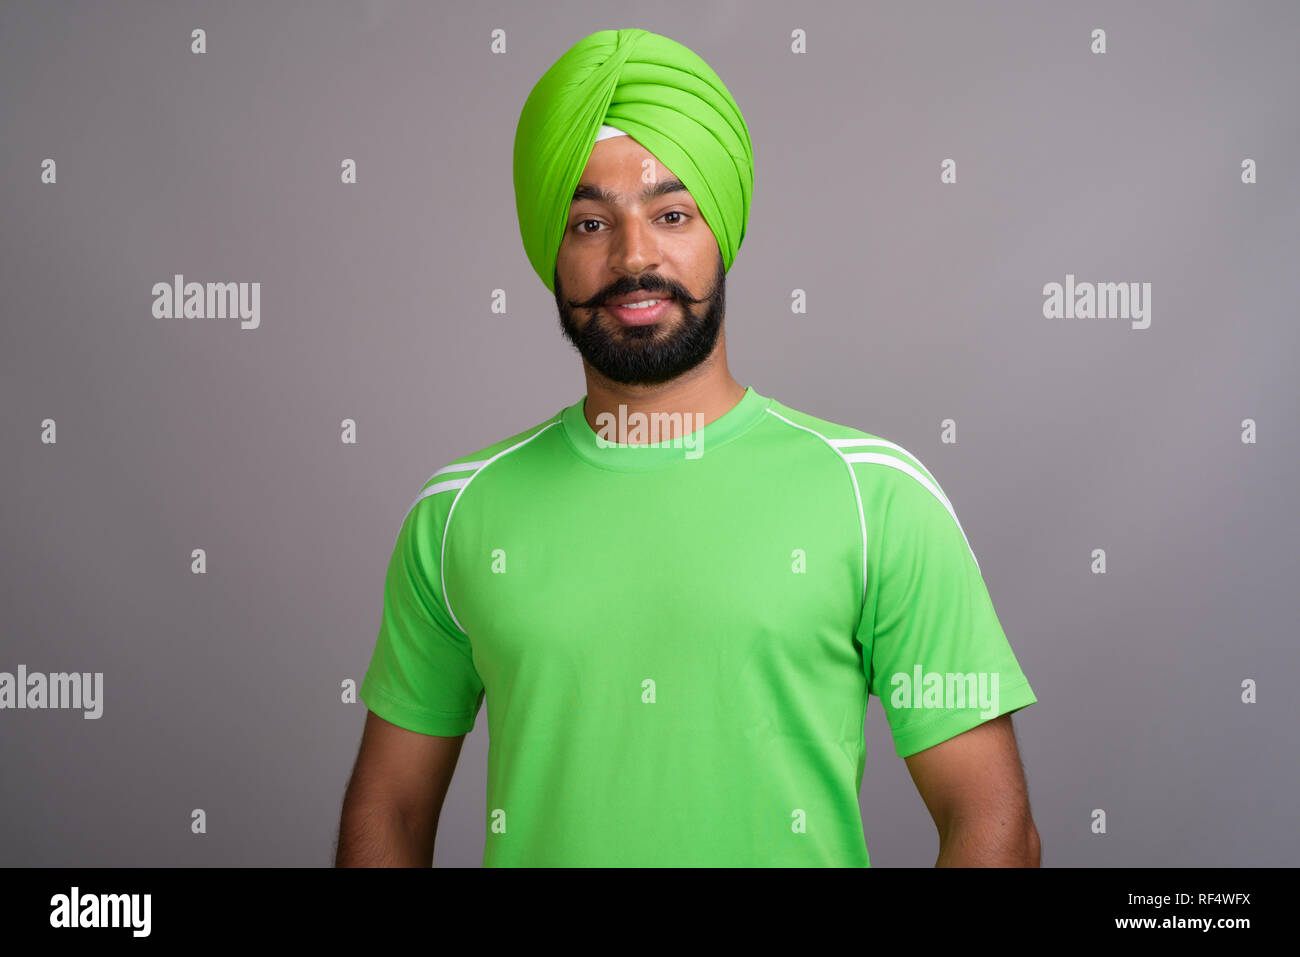 Young handsome Indian Sikh man wearing turban and green shirt Stock Photo